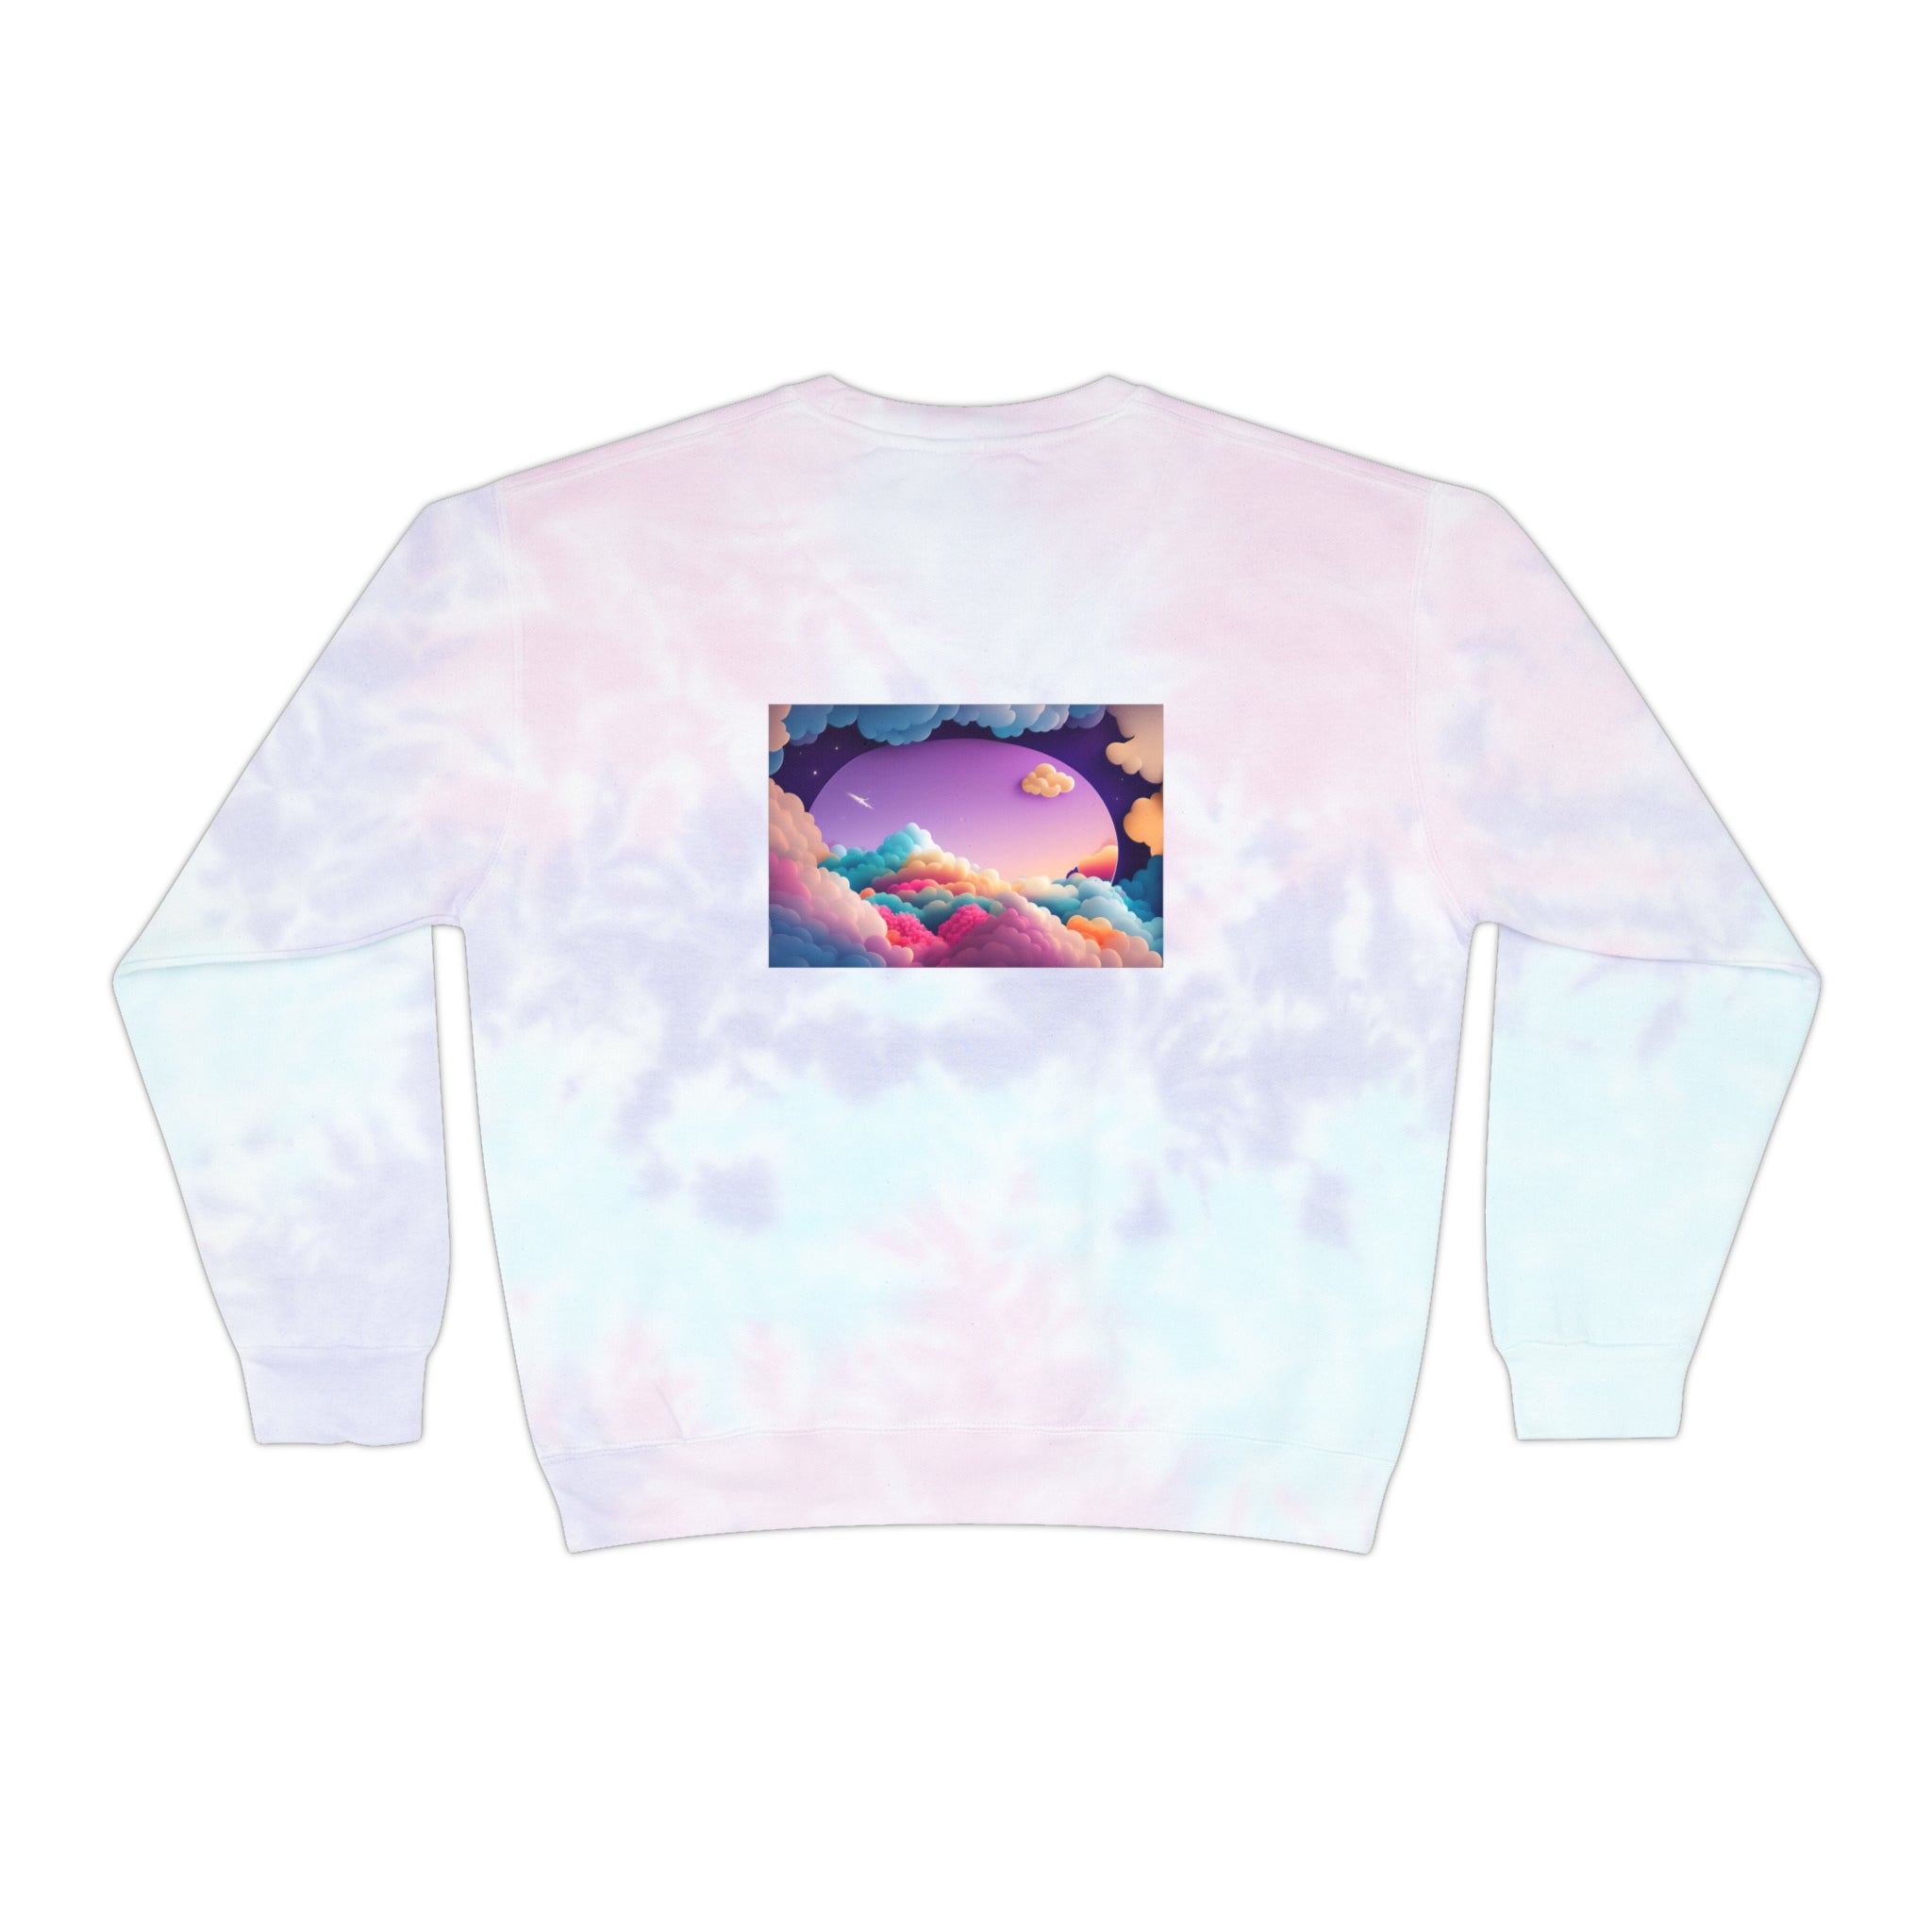 Unique Tie-Dye Crewneck, Unisex, Stand Out from the Crowd